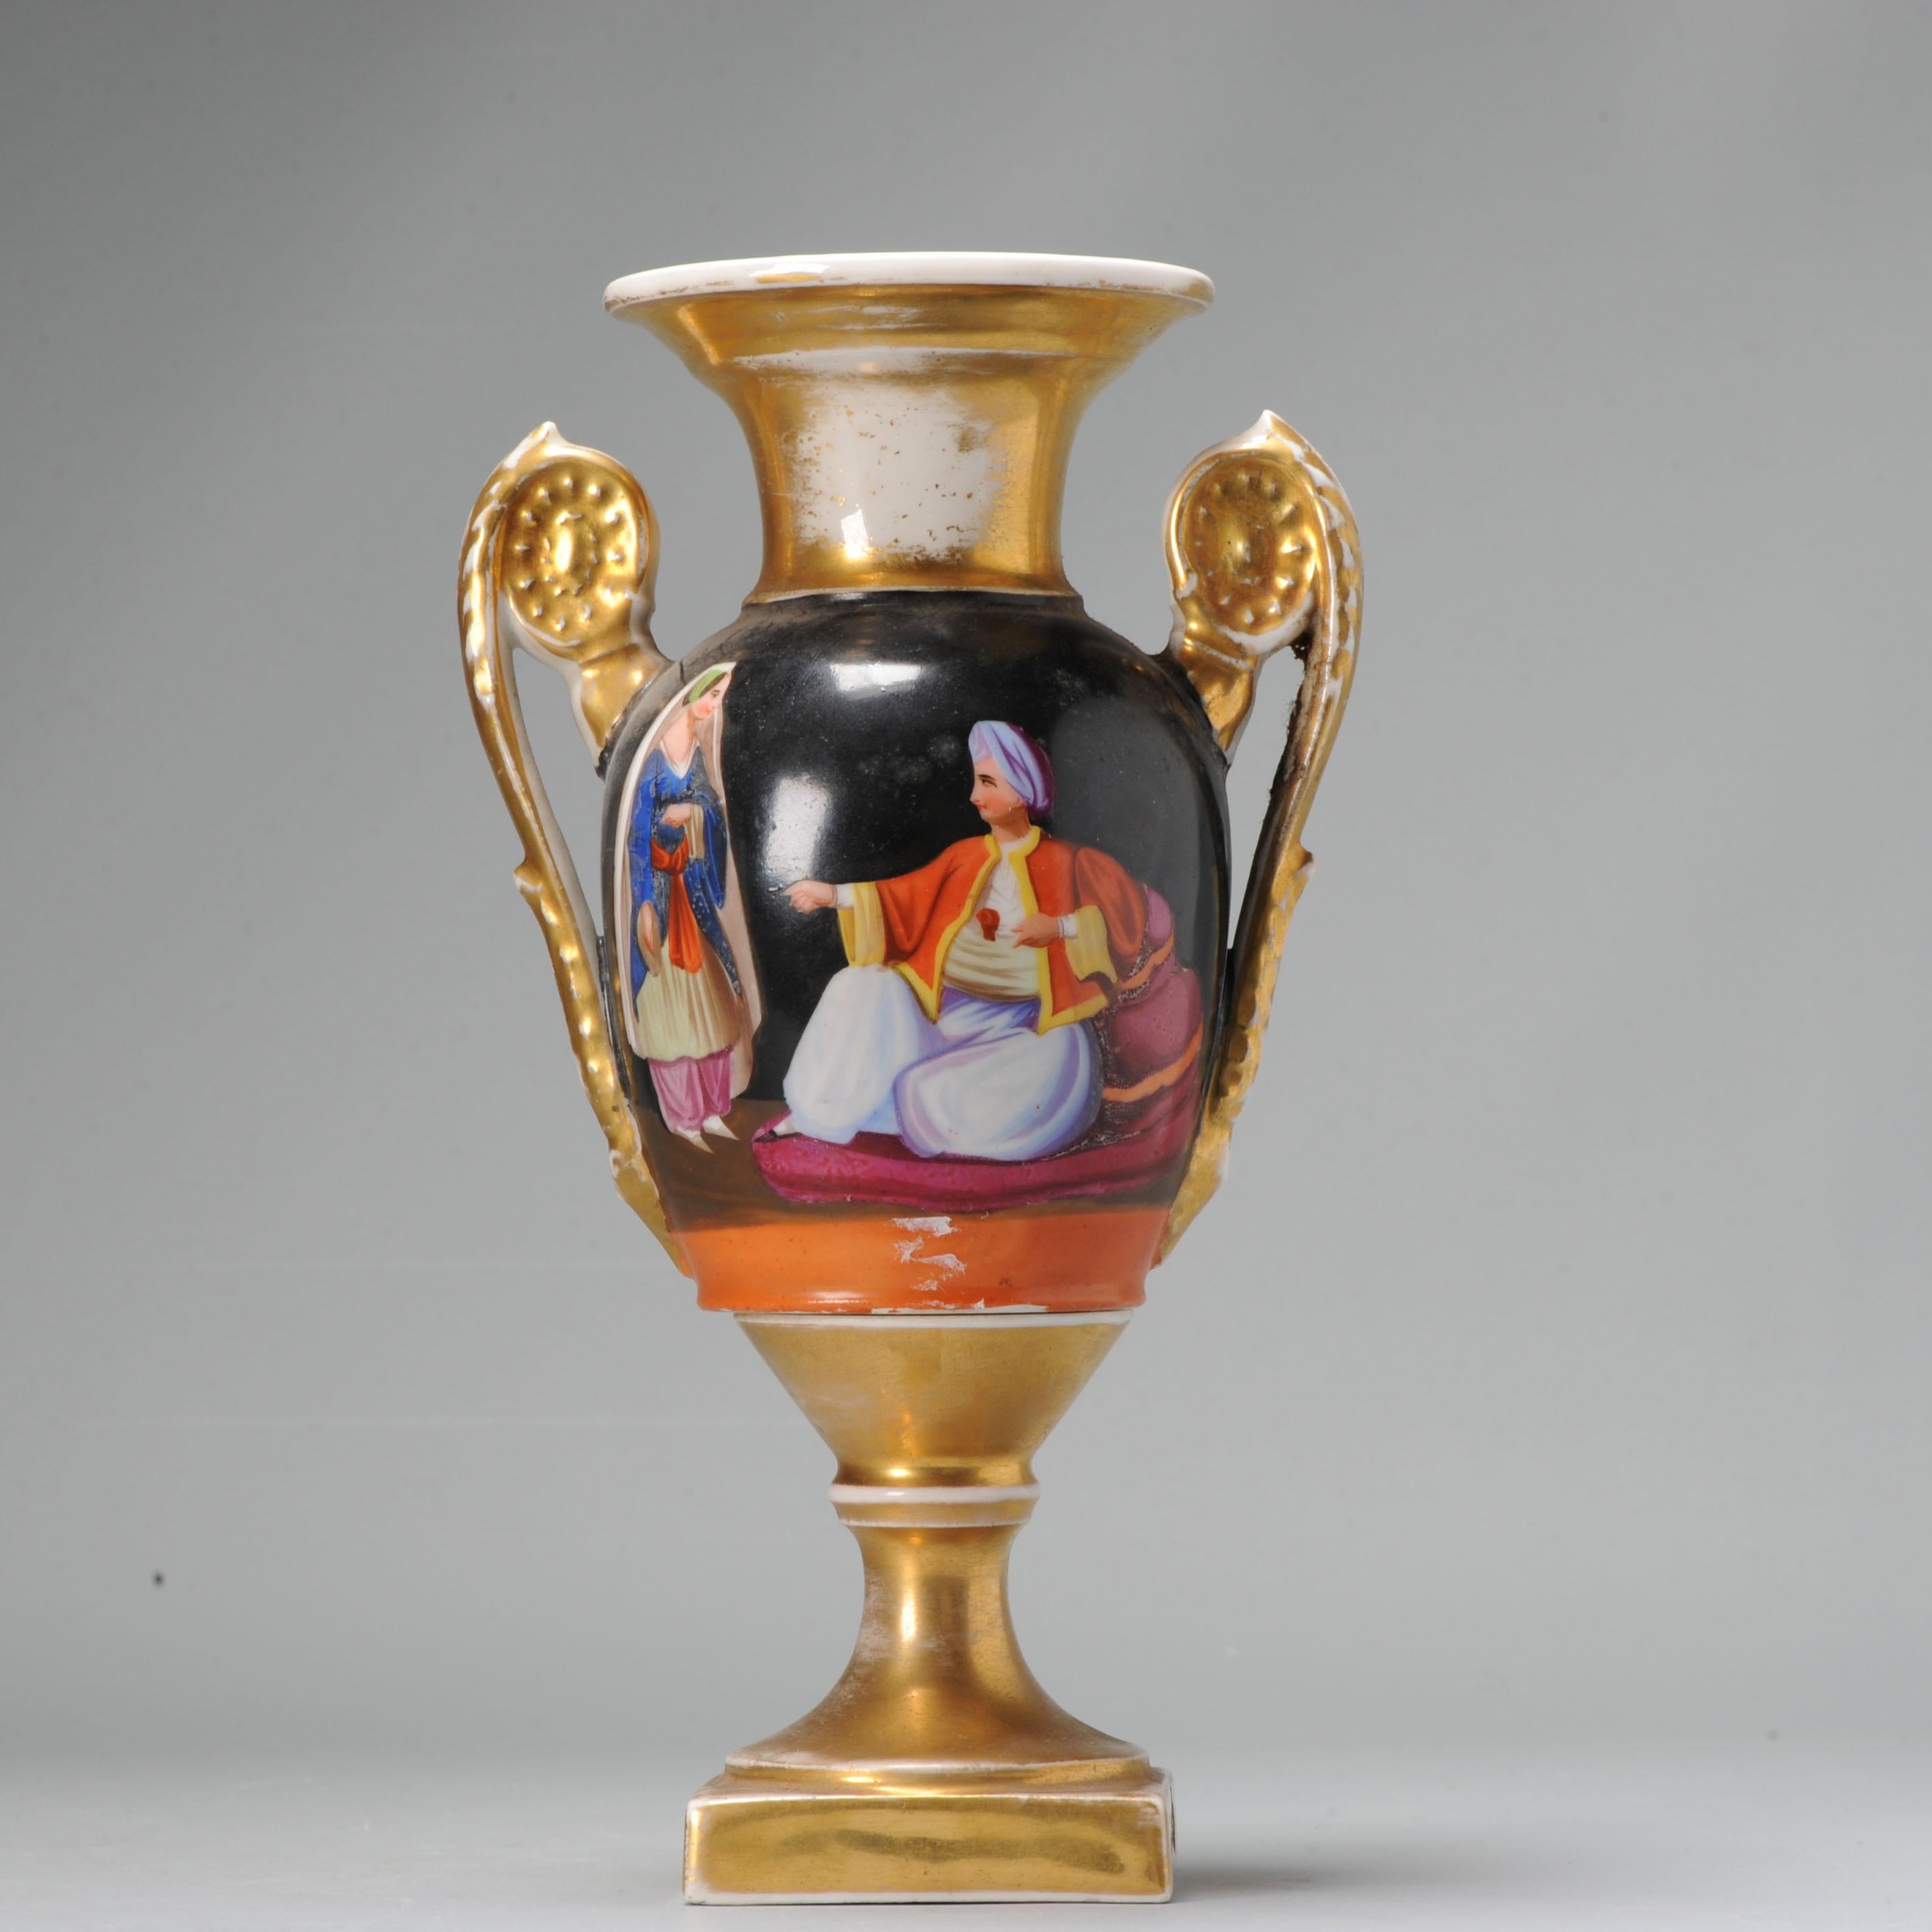 French porcelain vase

Condition
No real damages found, just a small process flaw in base and some ware to ennamel. 22cm
Period
19th century.